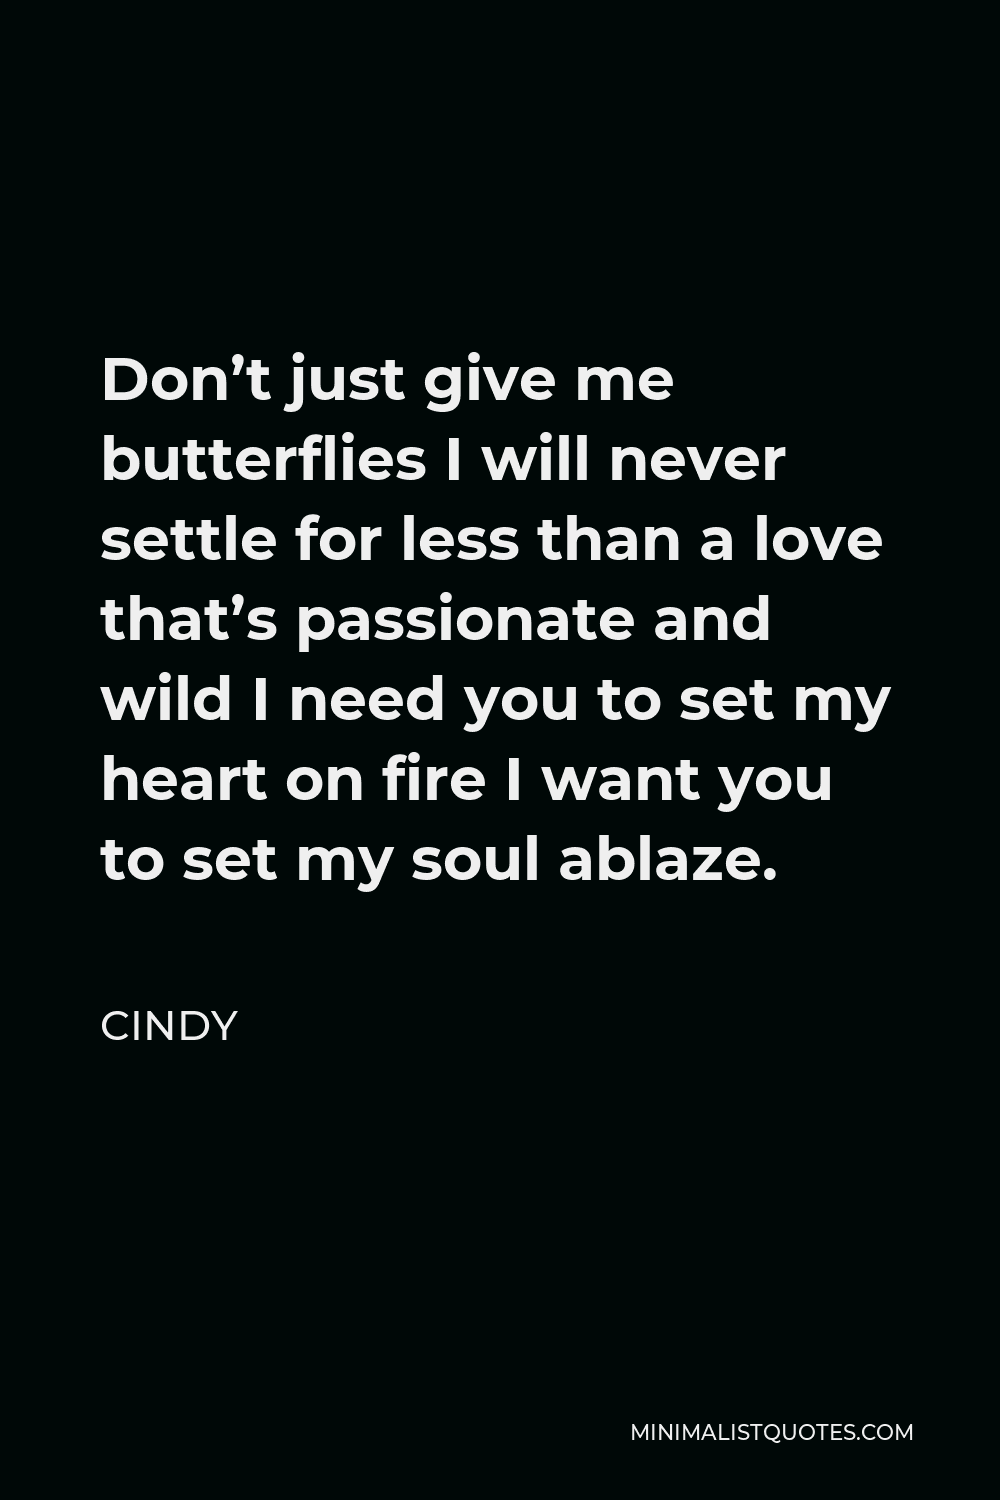 Cindy Quote - Don’t just give me butterflies I will never settle for less than a love that’s passionate and wild I need you to set my heart on fire I want you to set my soul ablaze.